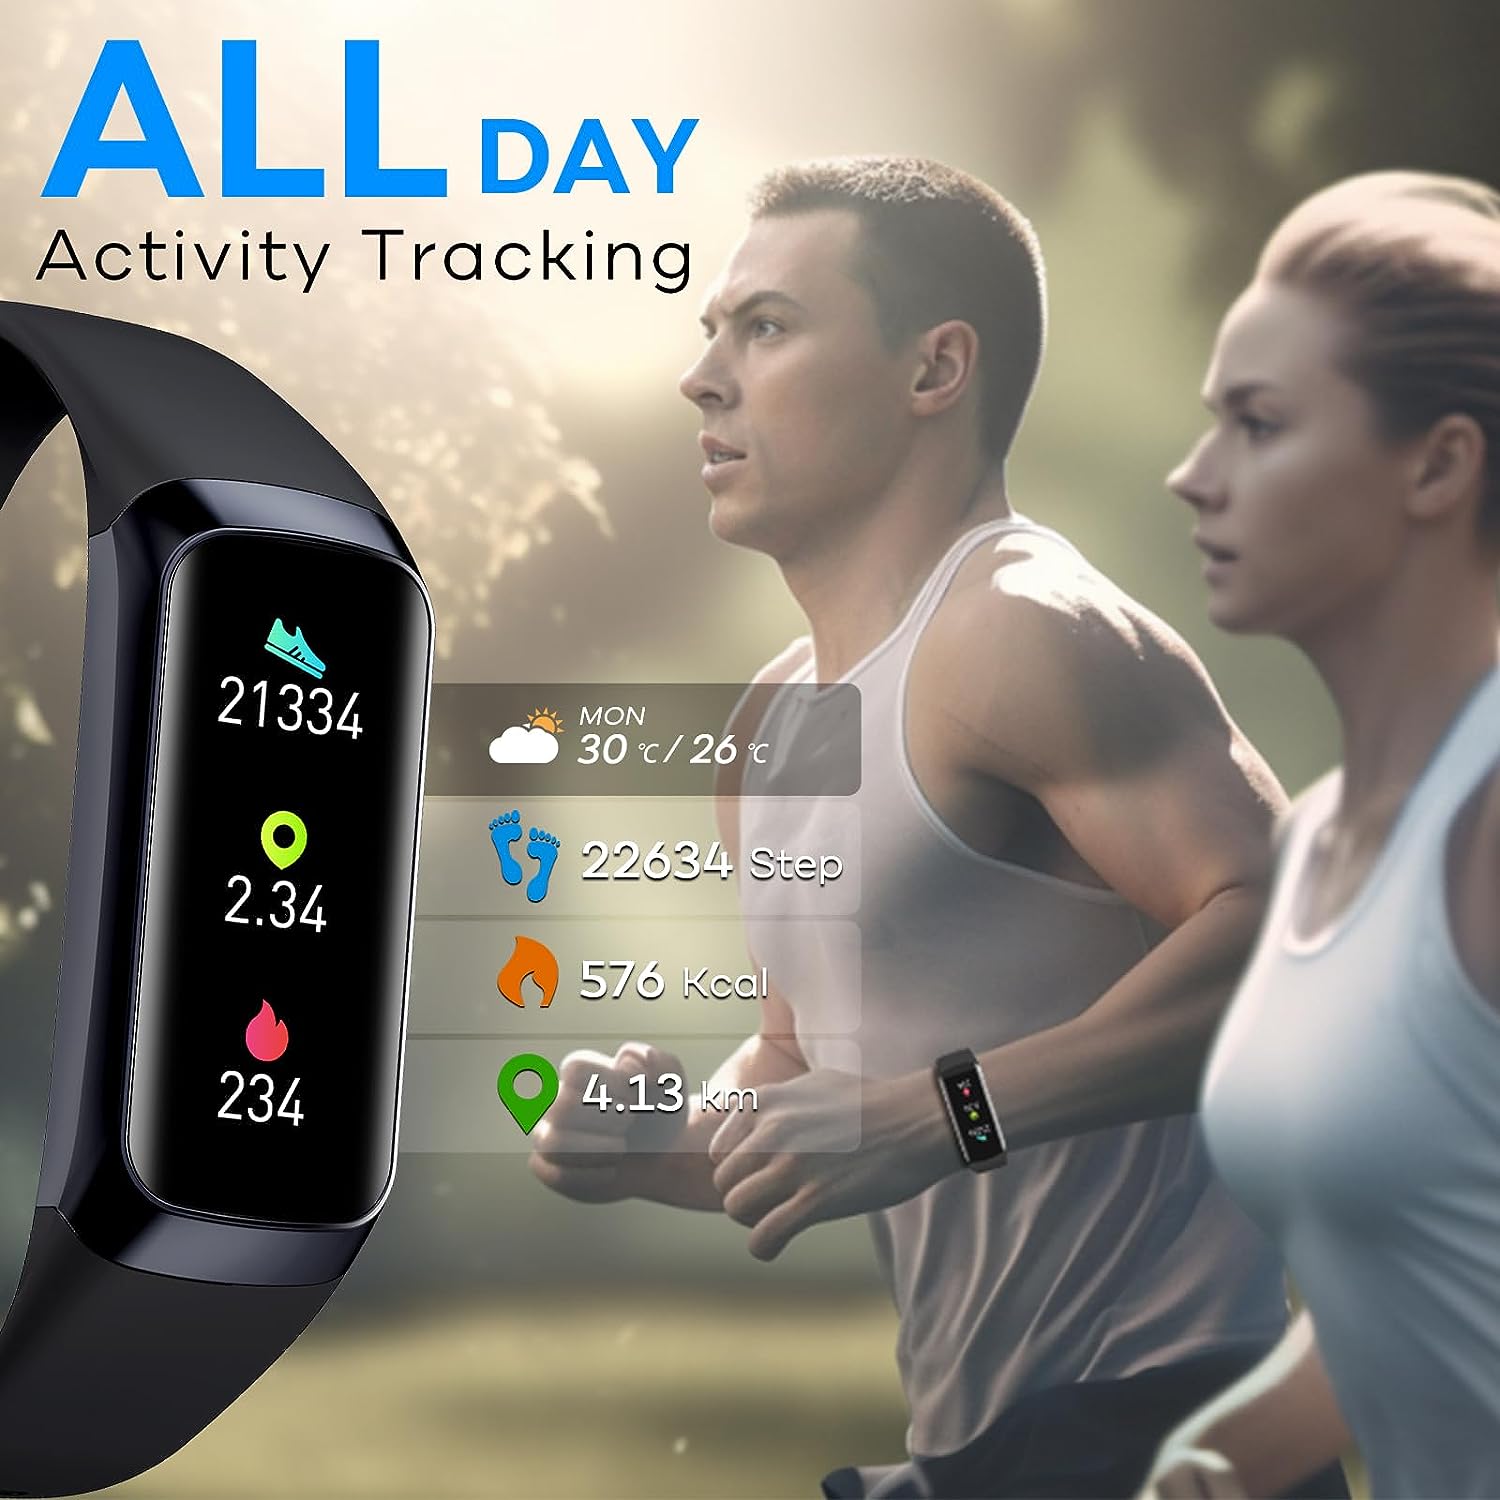 Fitness Tracker,Smart Watch with Blood Pressure Heart Rate Body Temperature & Sleep Monitor IP67 Waterproof Fitness Watch Step Calorie Counter Pedometer Health Watch for Android iOS Phones Men Women